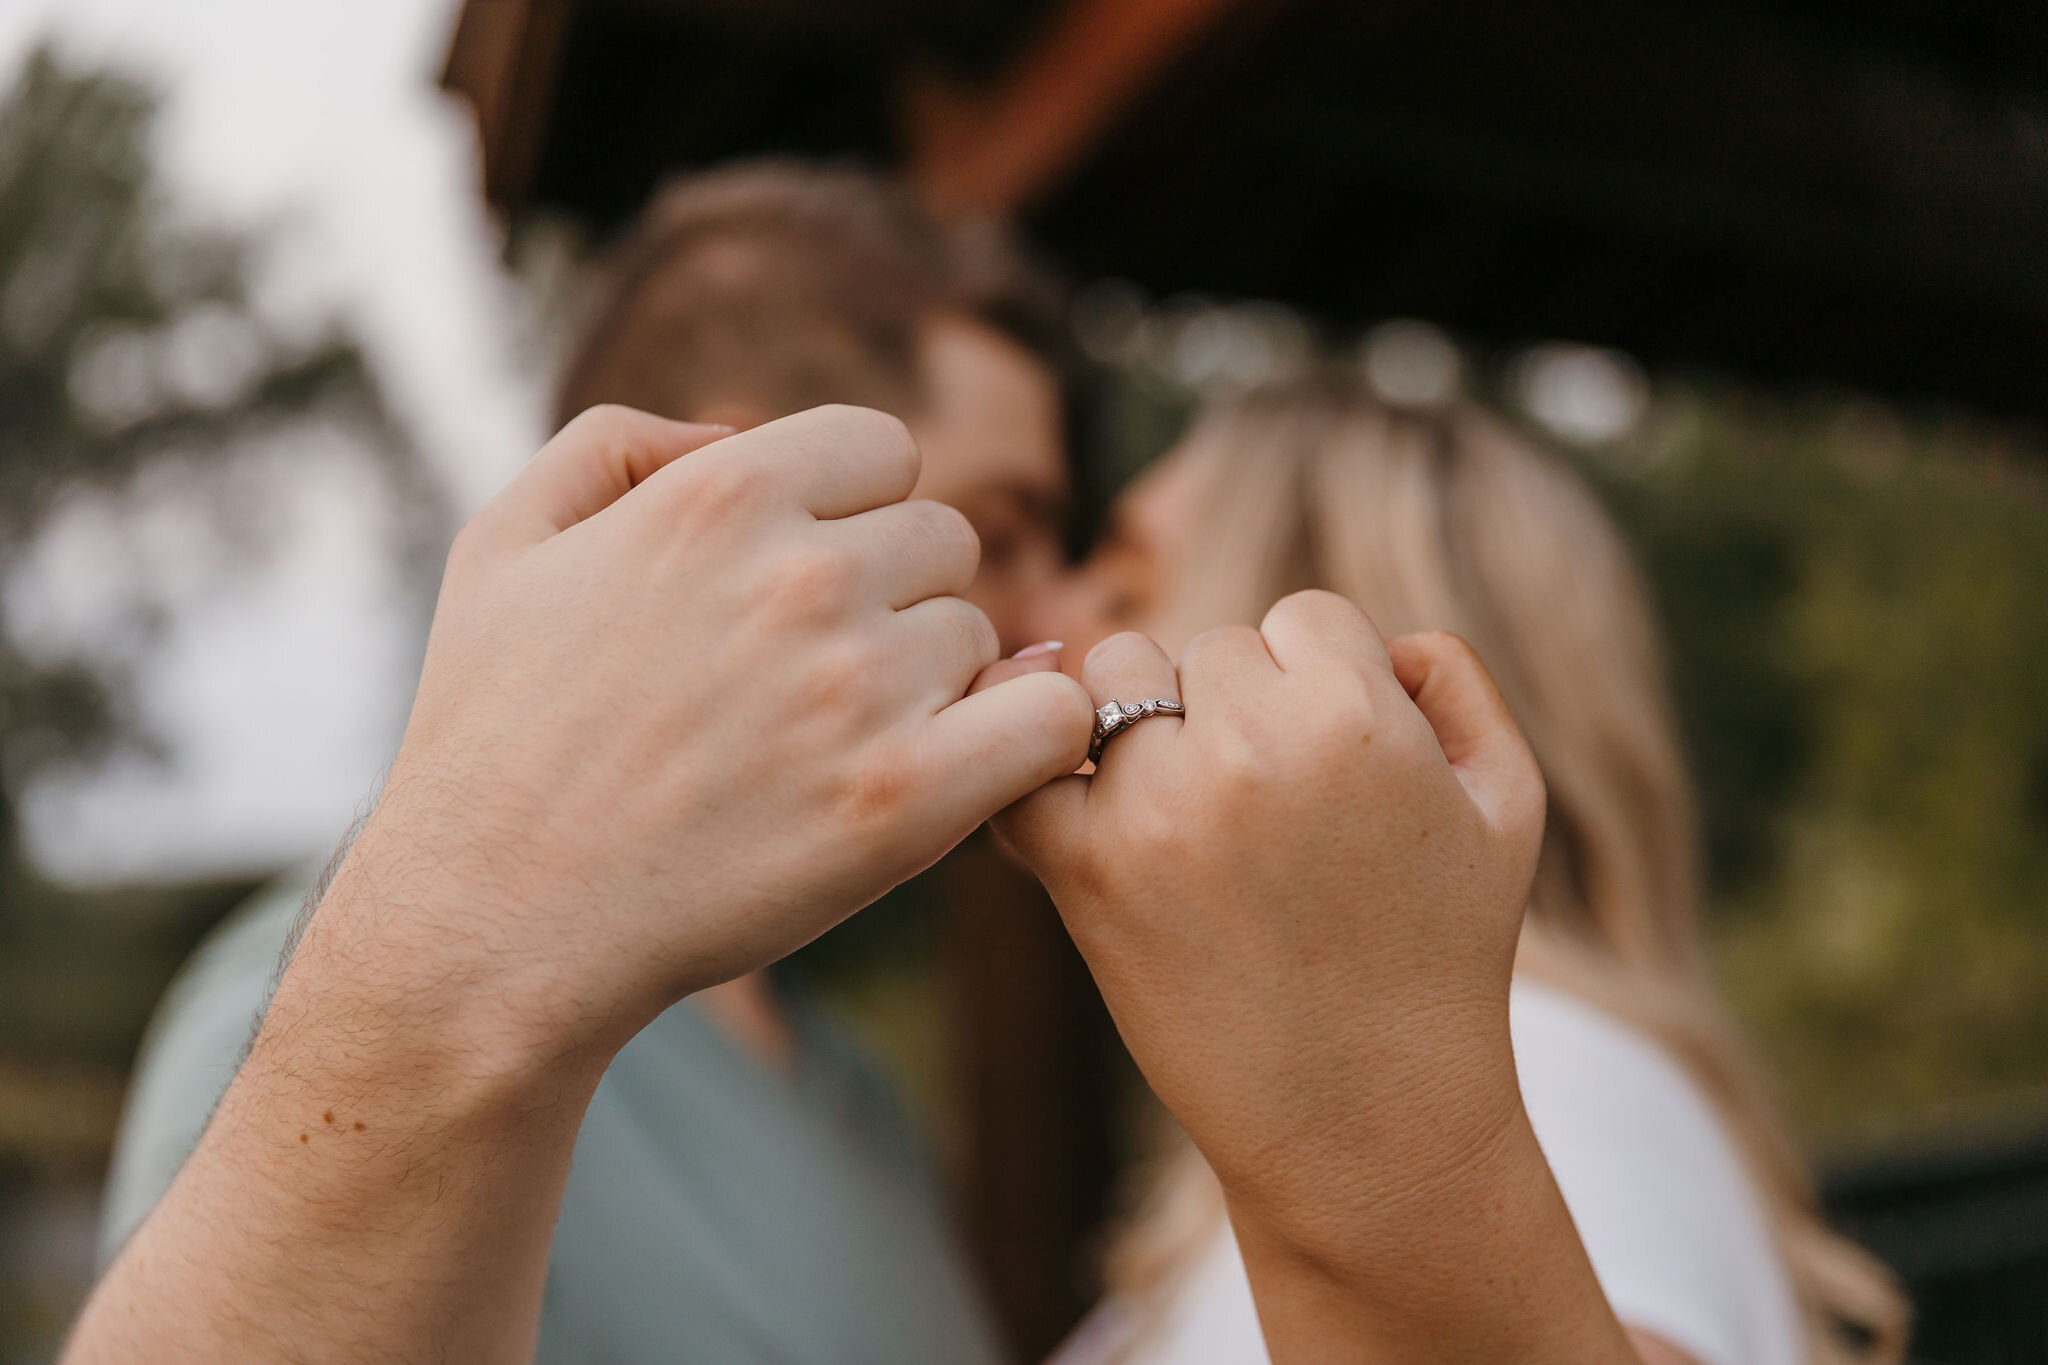 How To Take a Good Engagement Ring Selfie: 9 Simple Tips